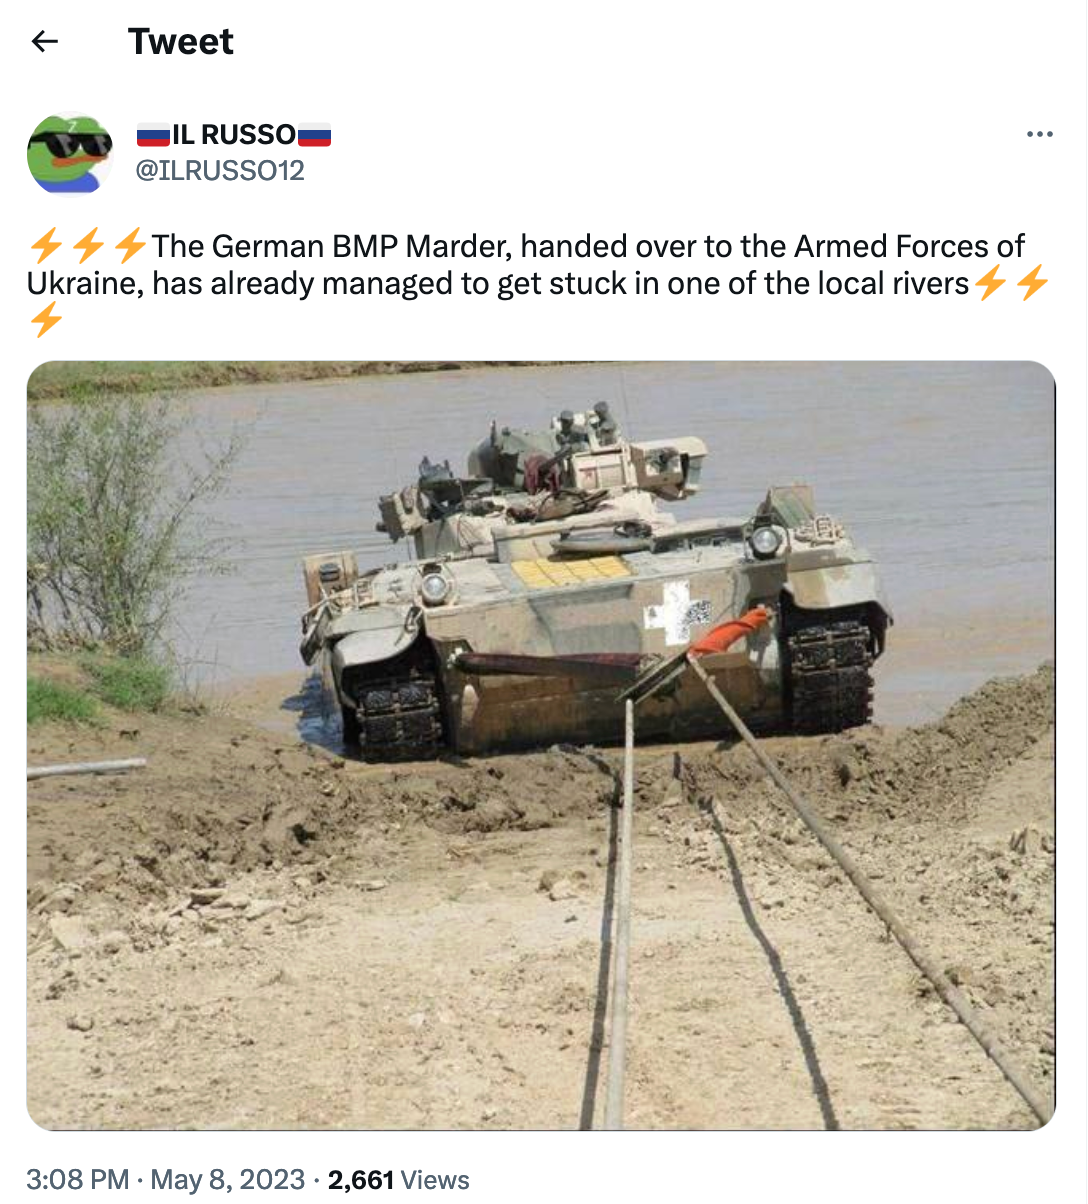 ALTERED: This is not a German BMP Marder infantry fighting vehicle